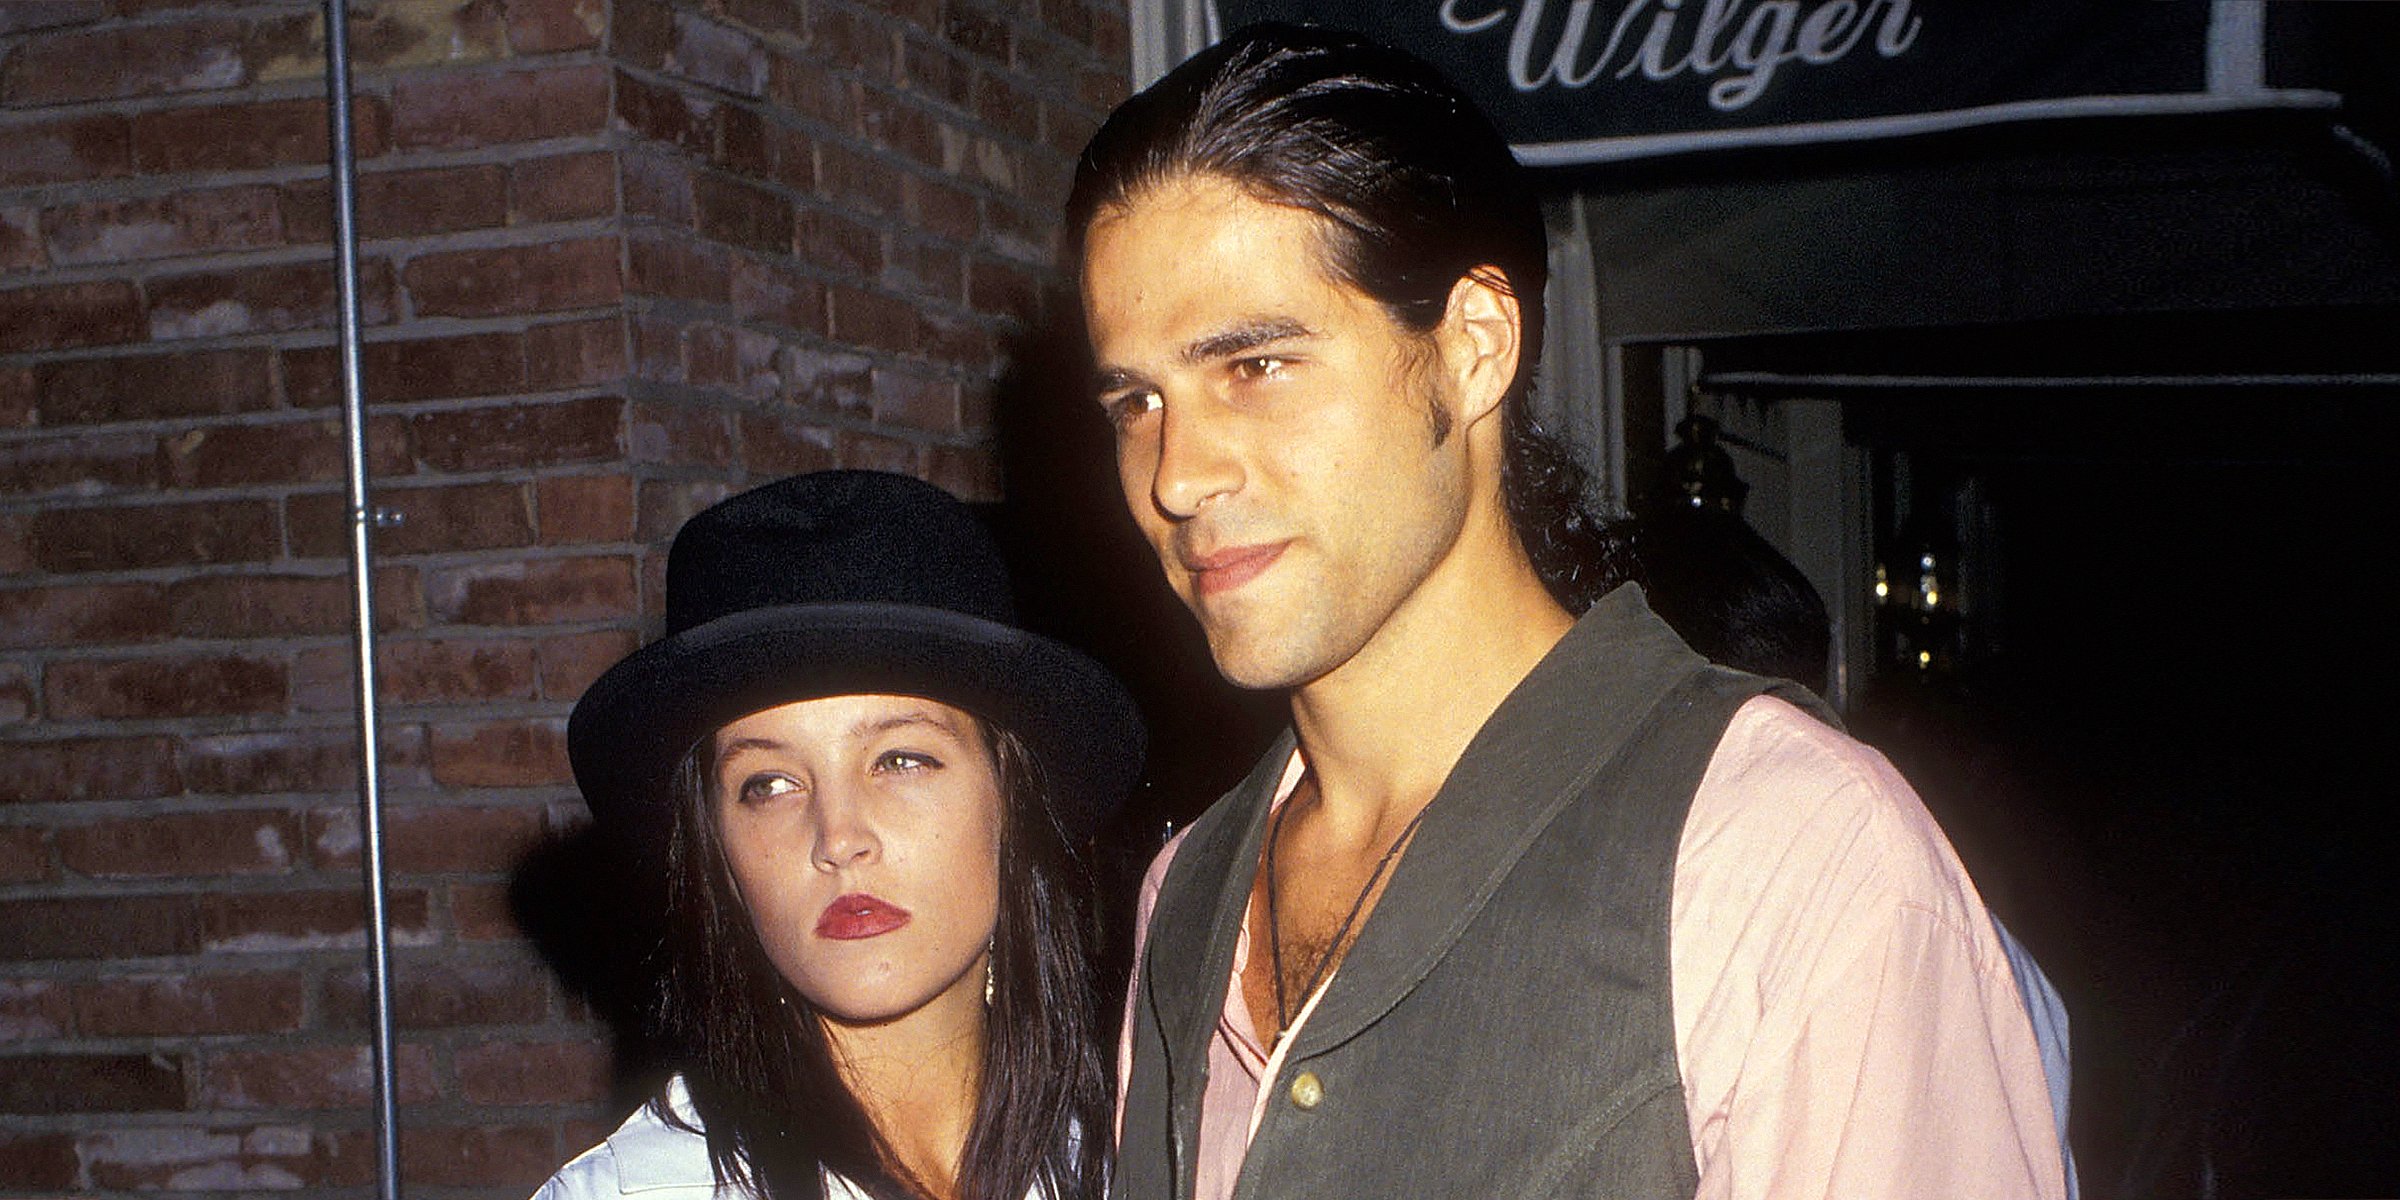 Lisa Marie Presley and Daniel Keough | Source: Getty Images